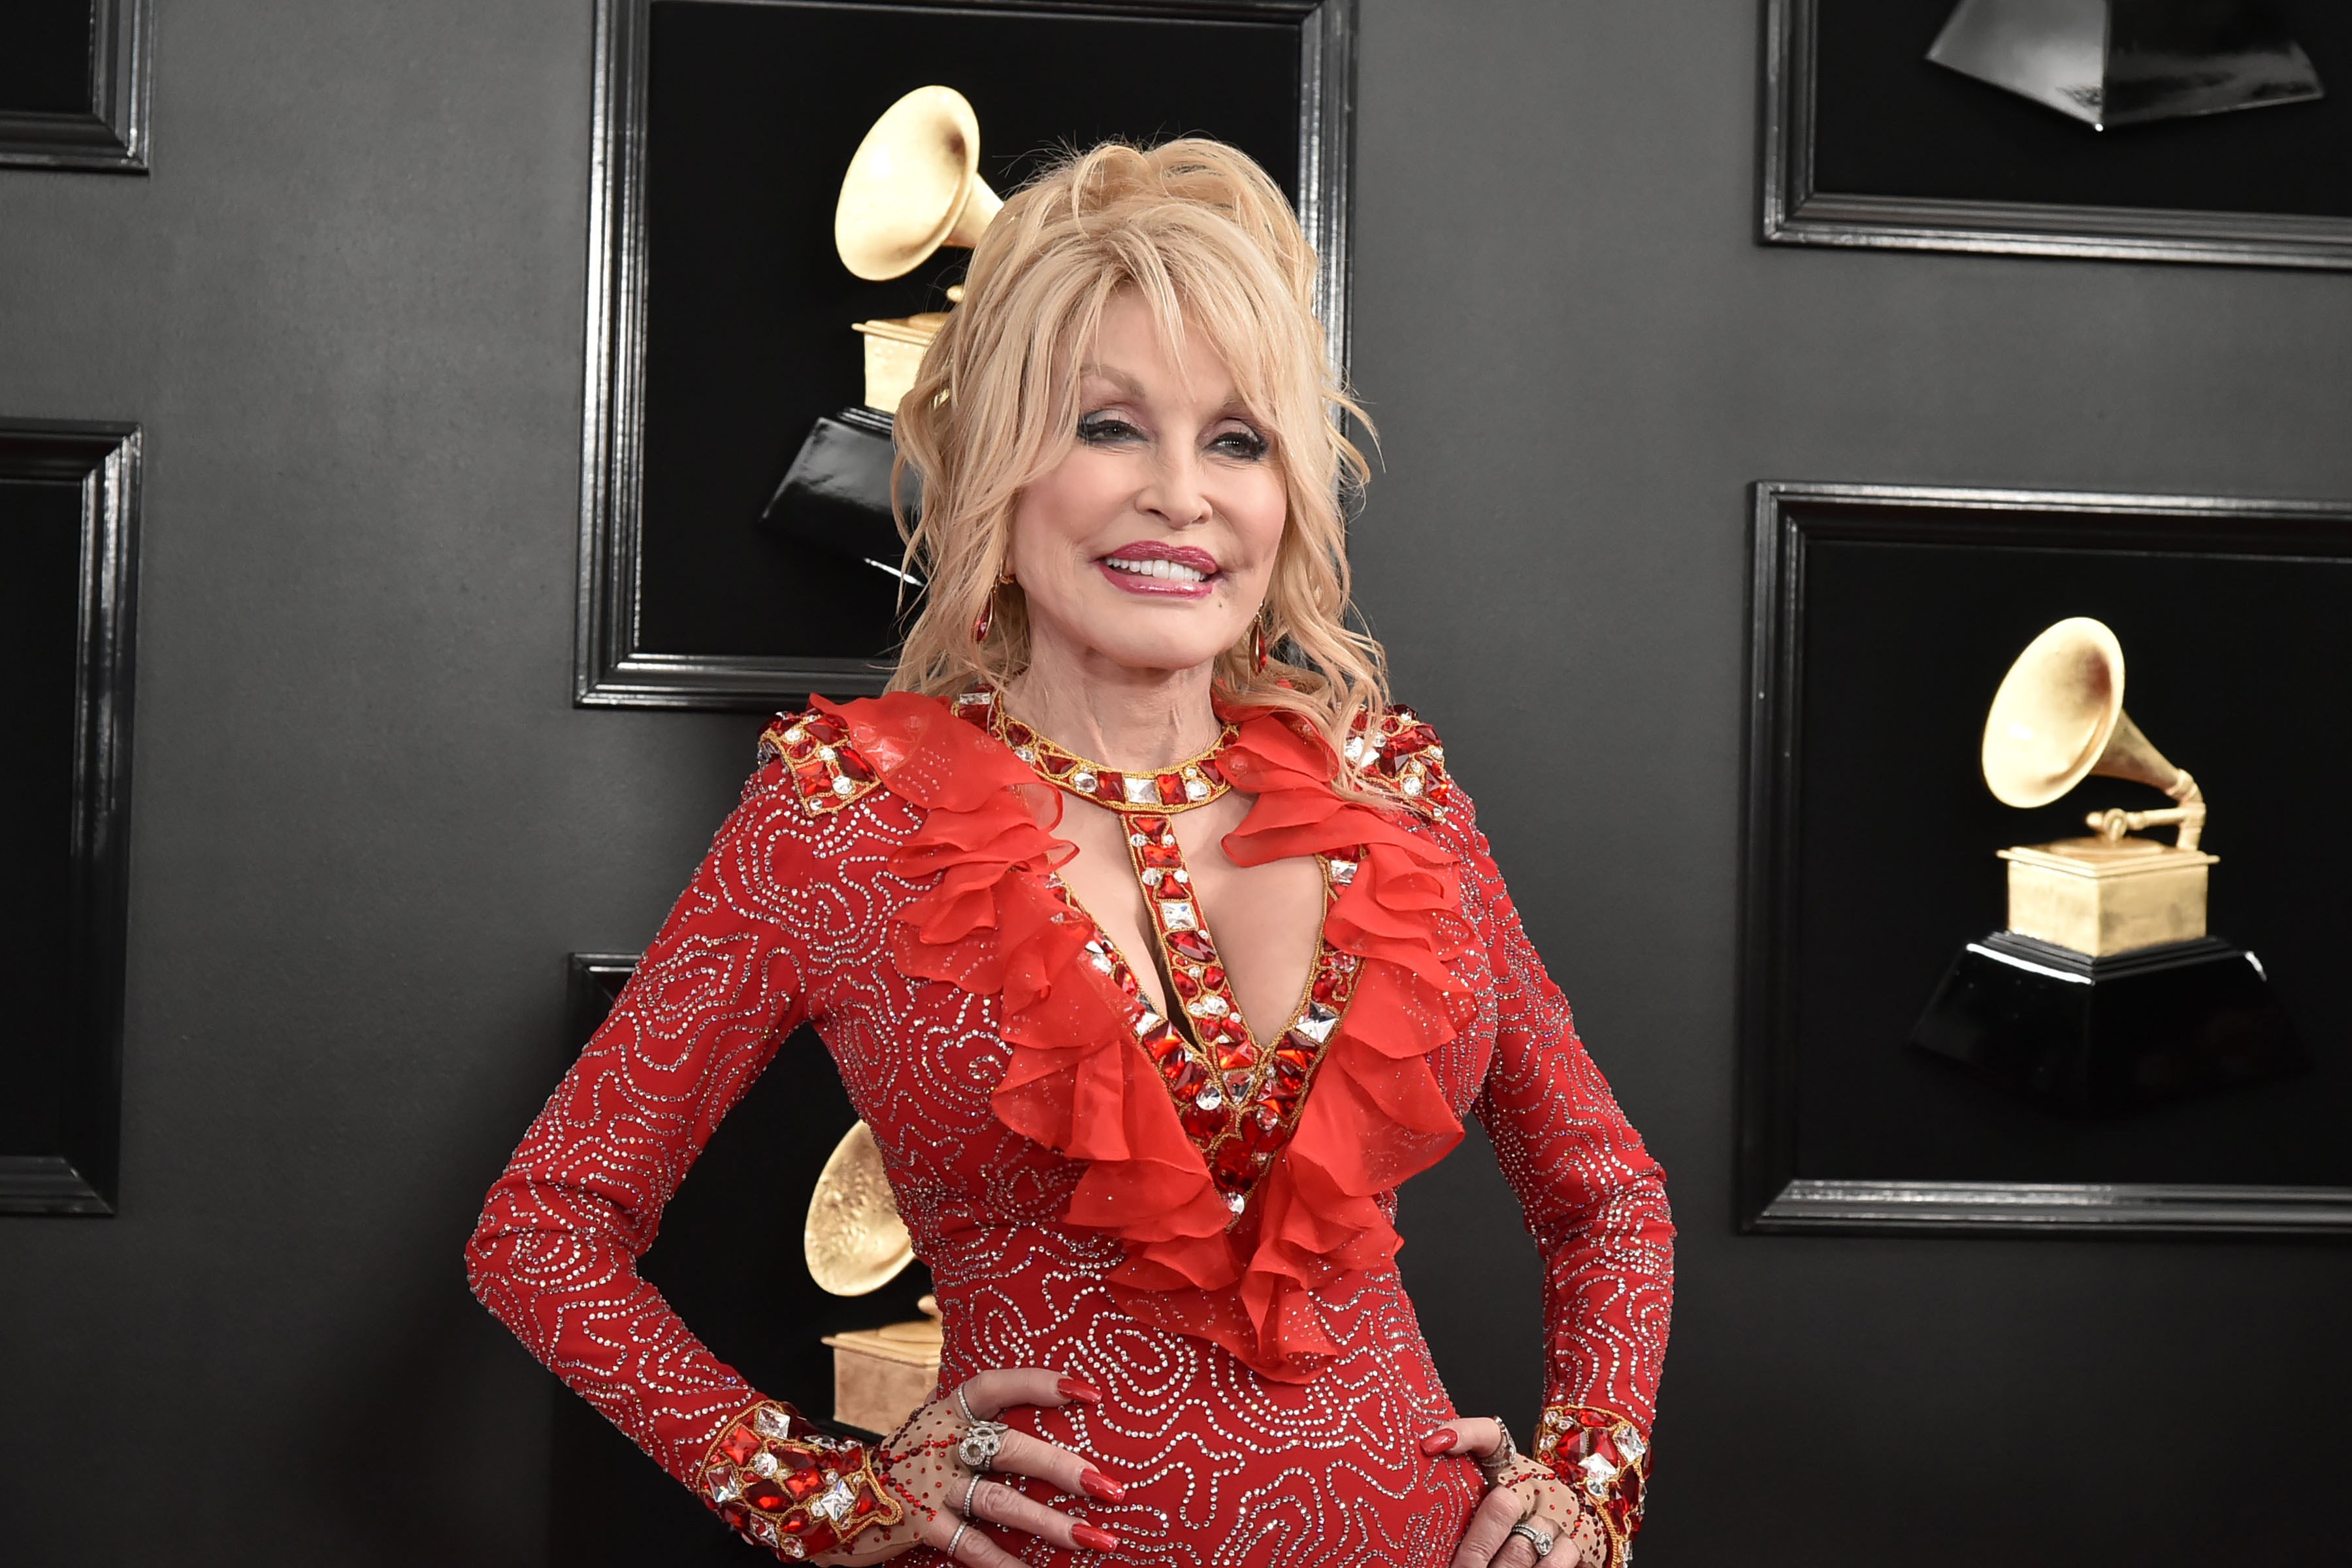 Dolly Parton attends the 61st Annual Grammy Awards at Staples Center on February 10, 2019 in Los Angeles, California.  |  Source: Getty Images